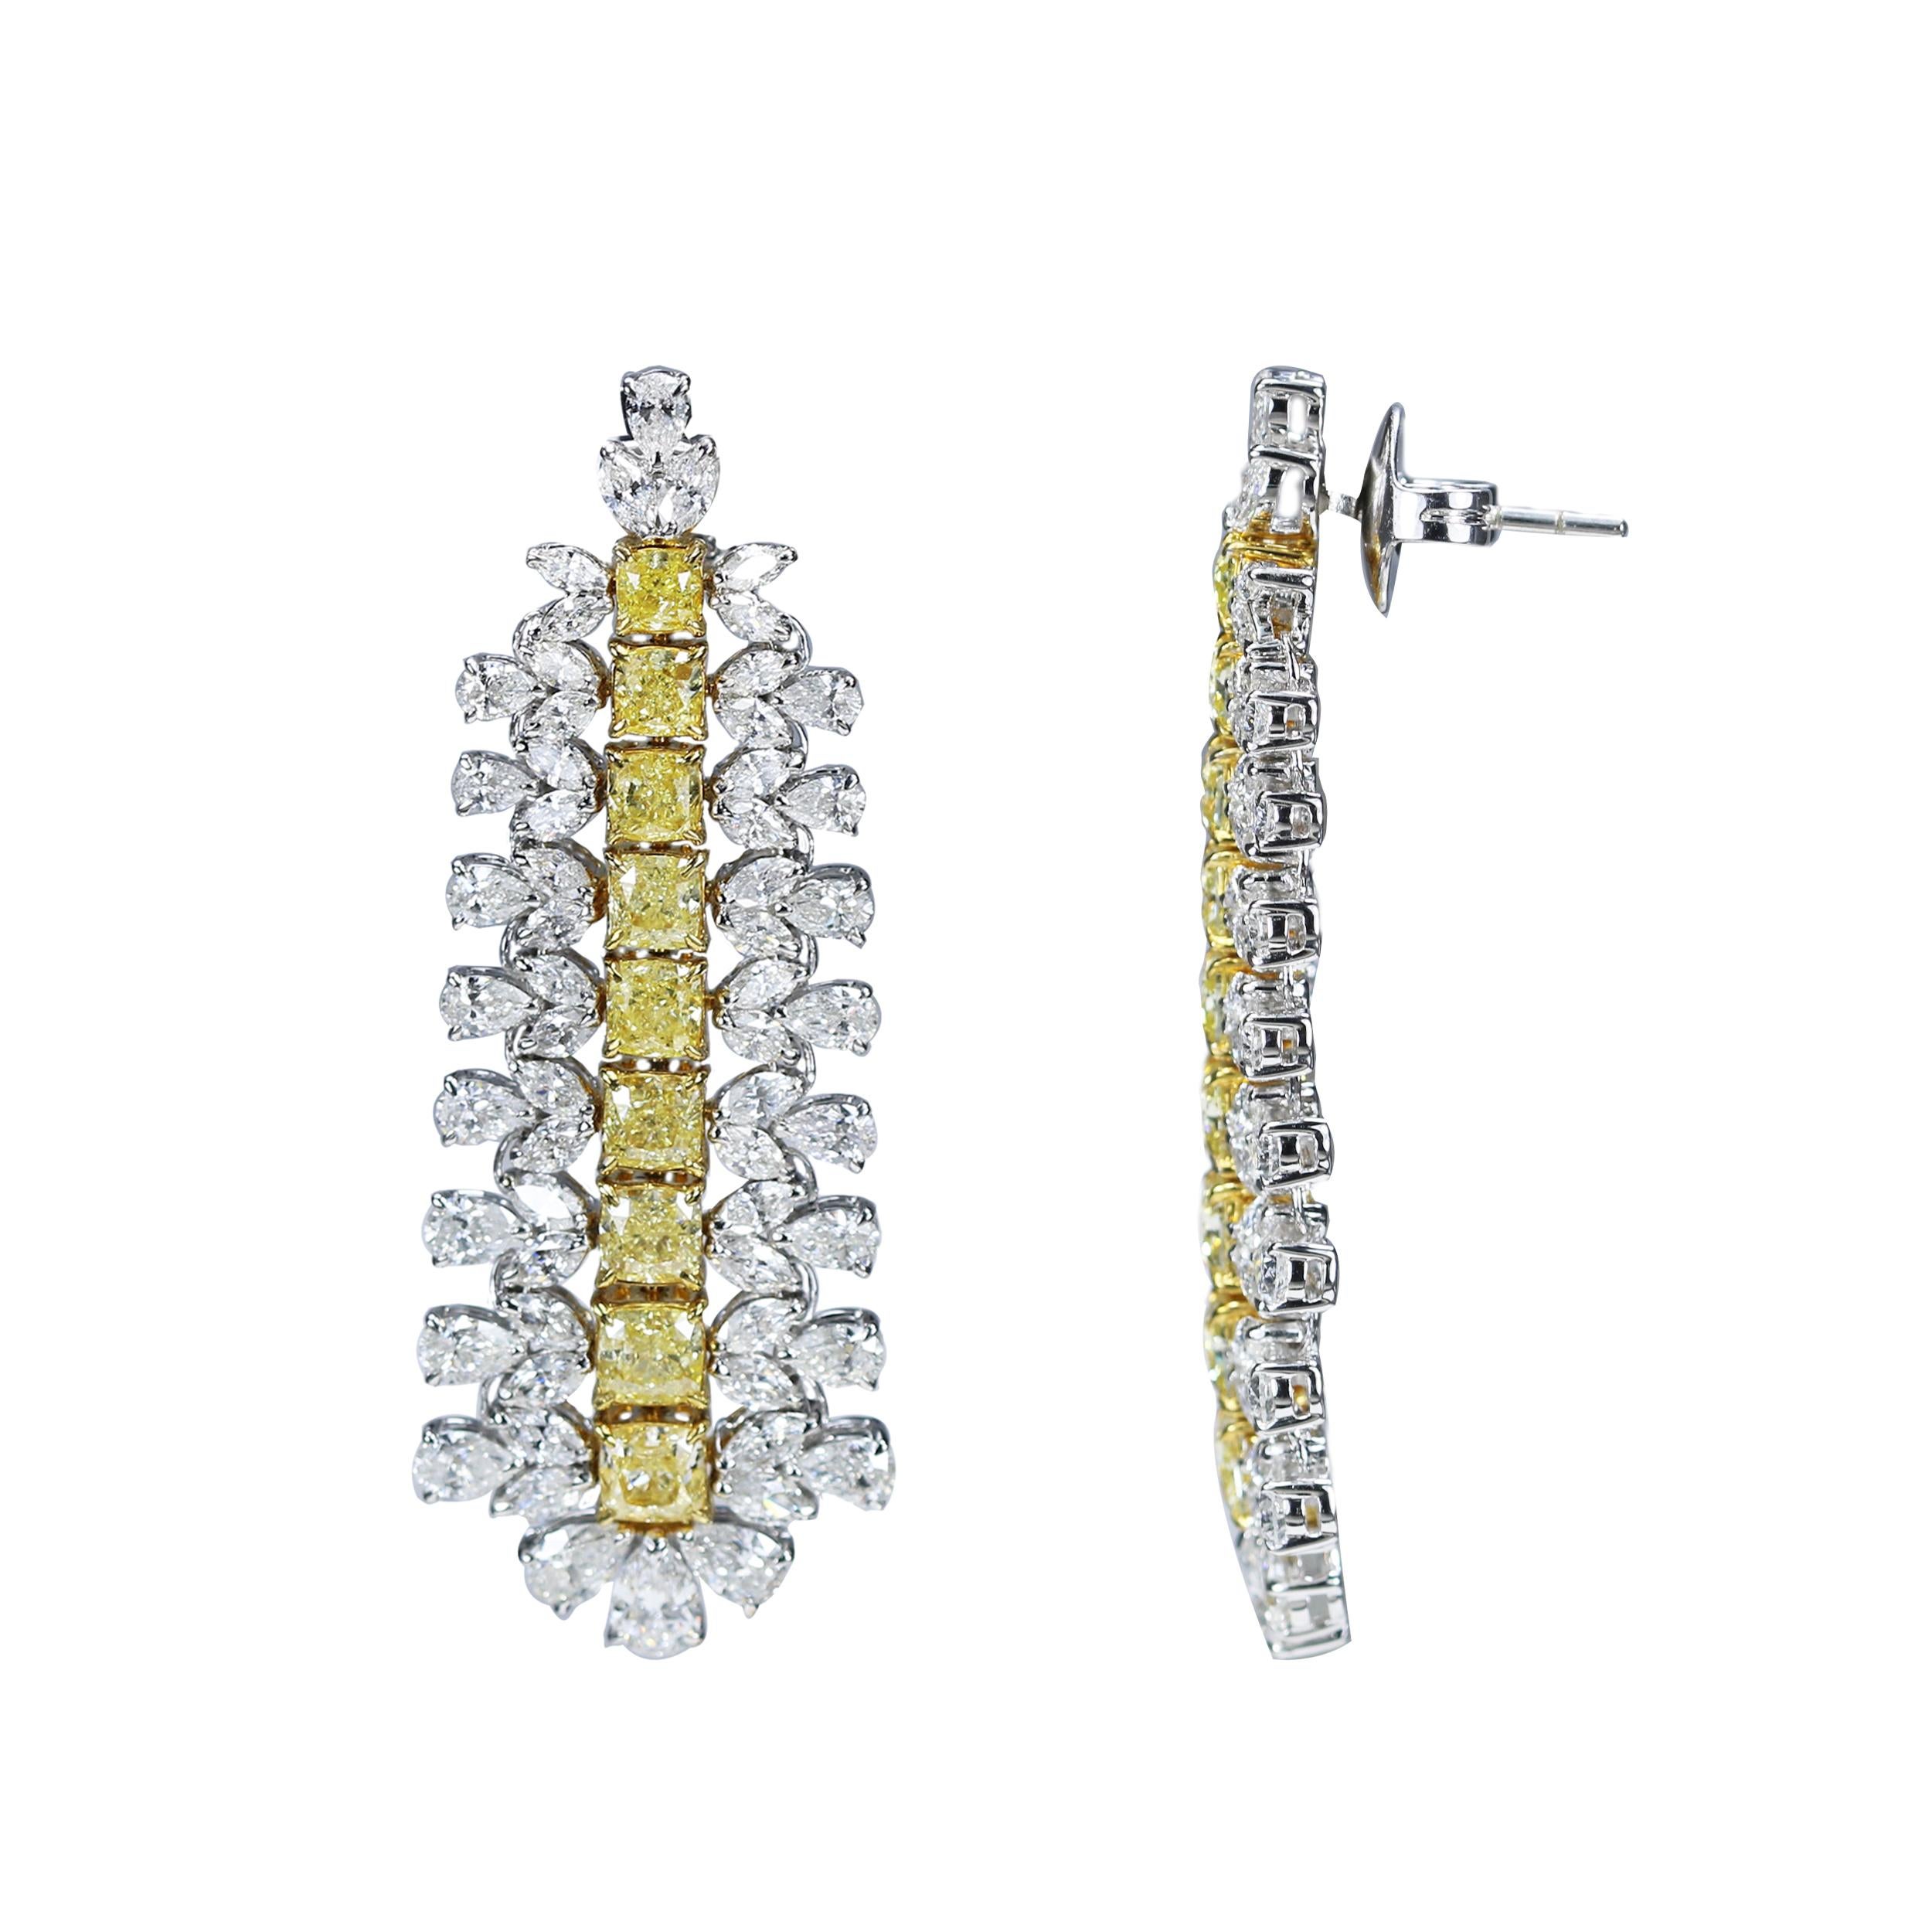 Yellow cushion cut diamonds and white diamonds earrings

These danglers with rare yellow cushion cut diamonds caged by pear and marquise shaped white diamonds are the epitome of regal charm. Handcrafted with 134 handpicked stones, they exude the